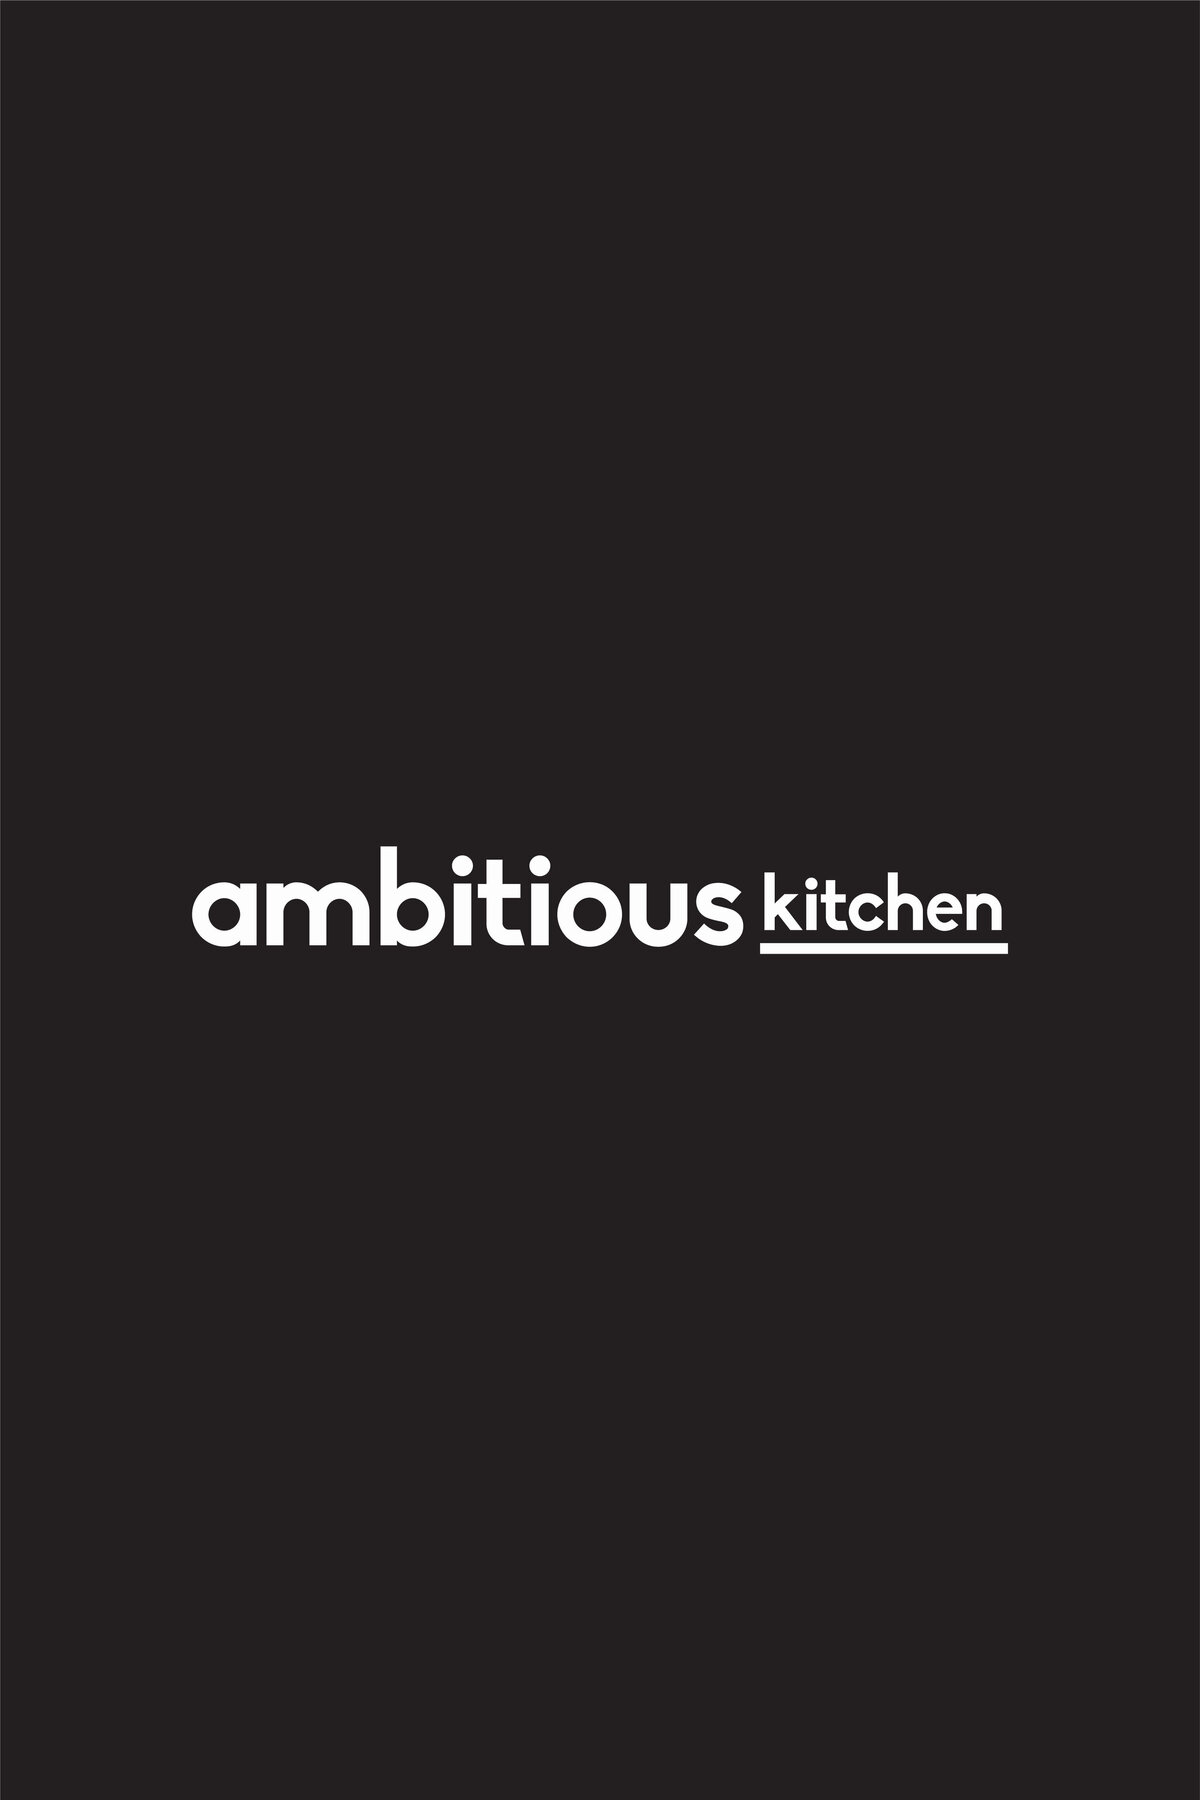 Food and Lifestyle Branding for Ambitious Kitchen by Katelyn Gambler14